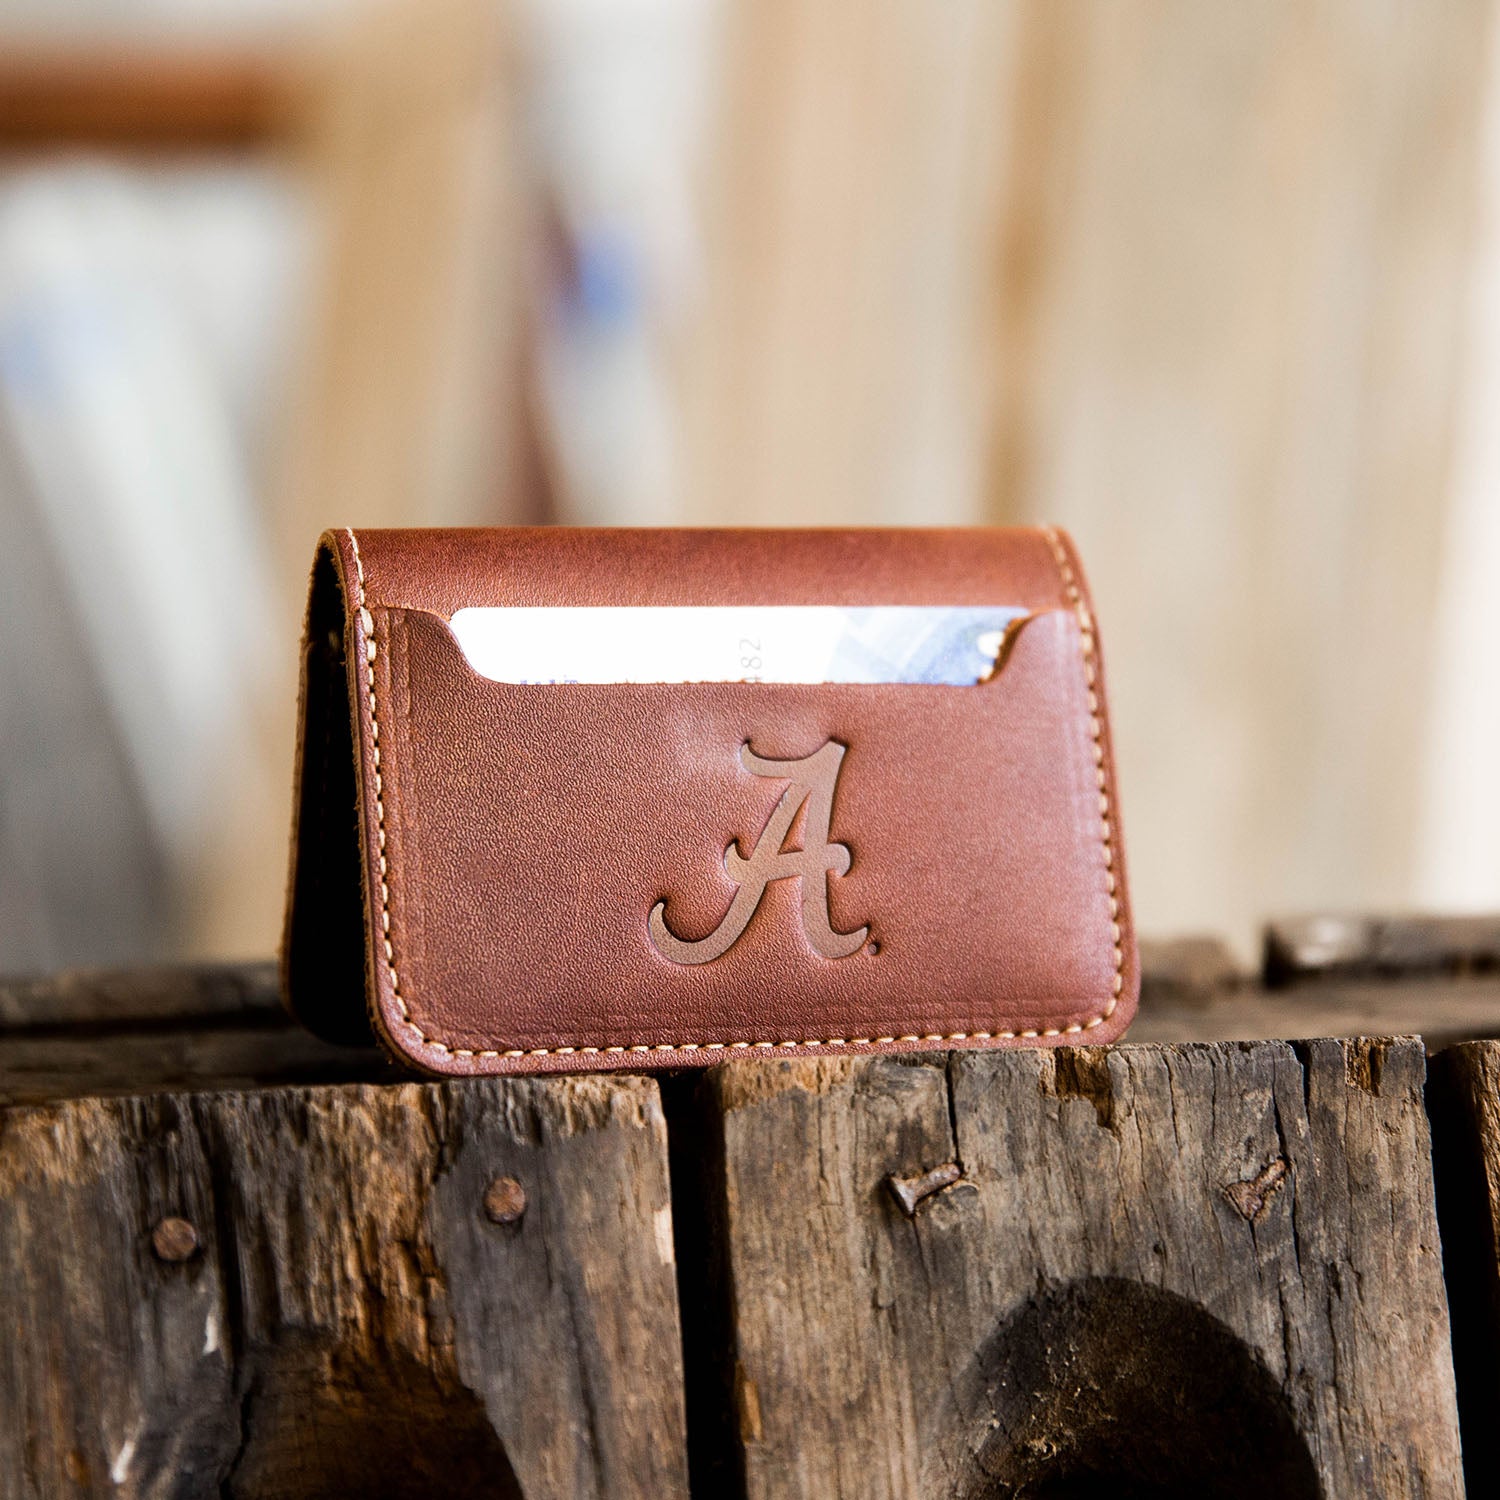 The Officially Licensed Alabama Gates Bifold Money Clip Wallet